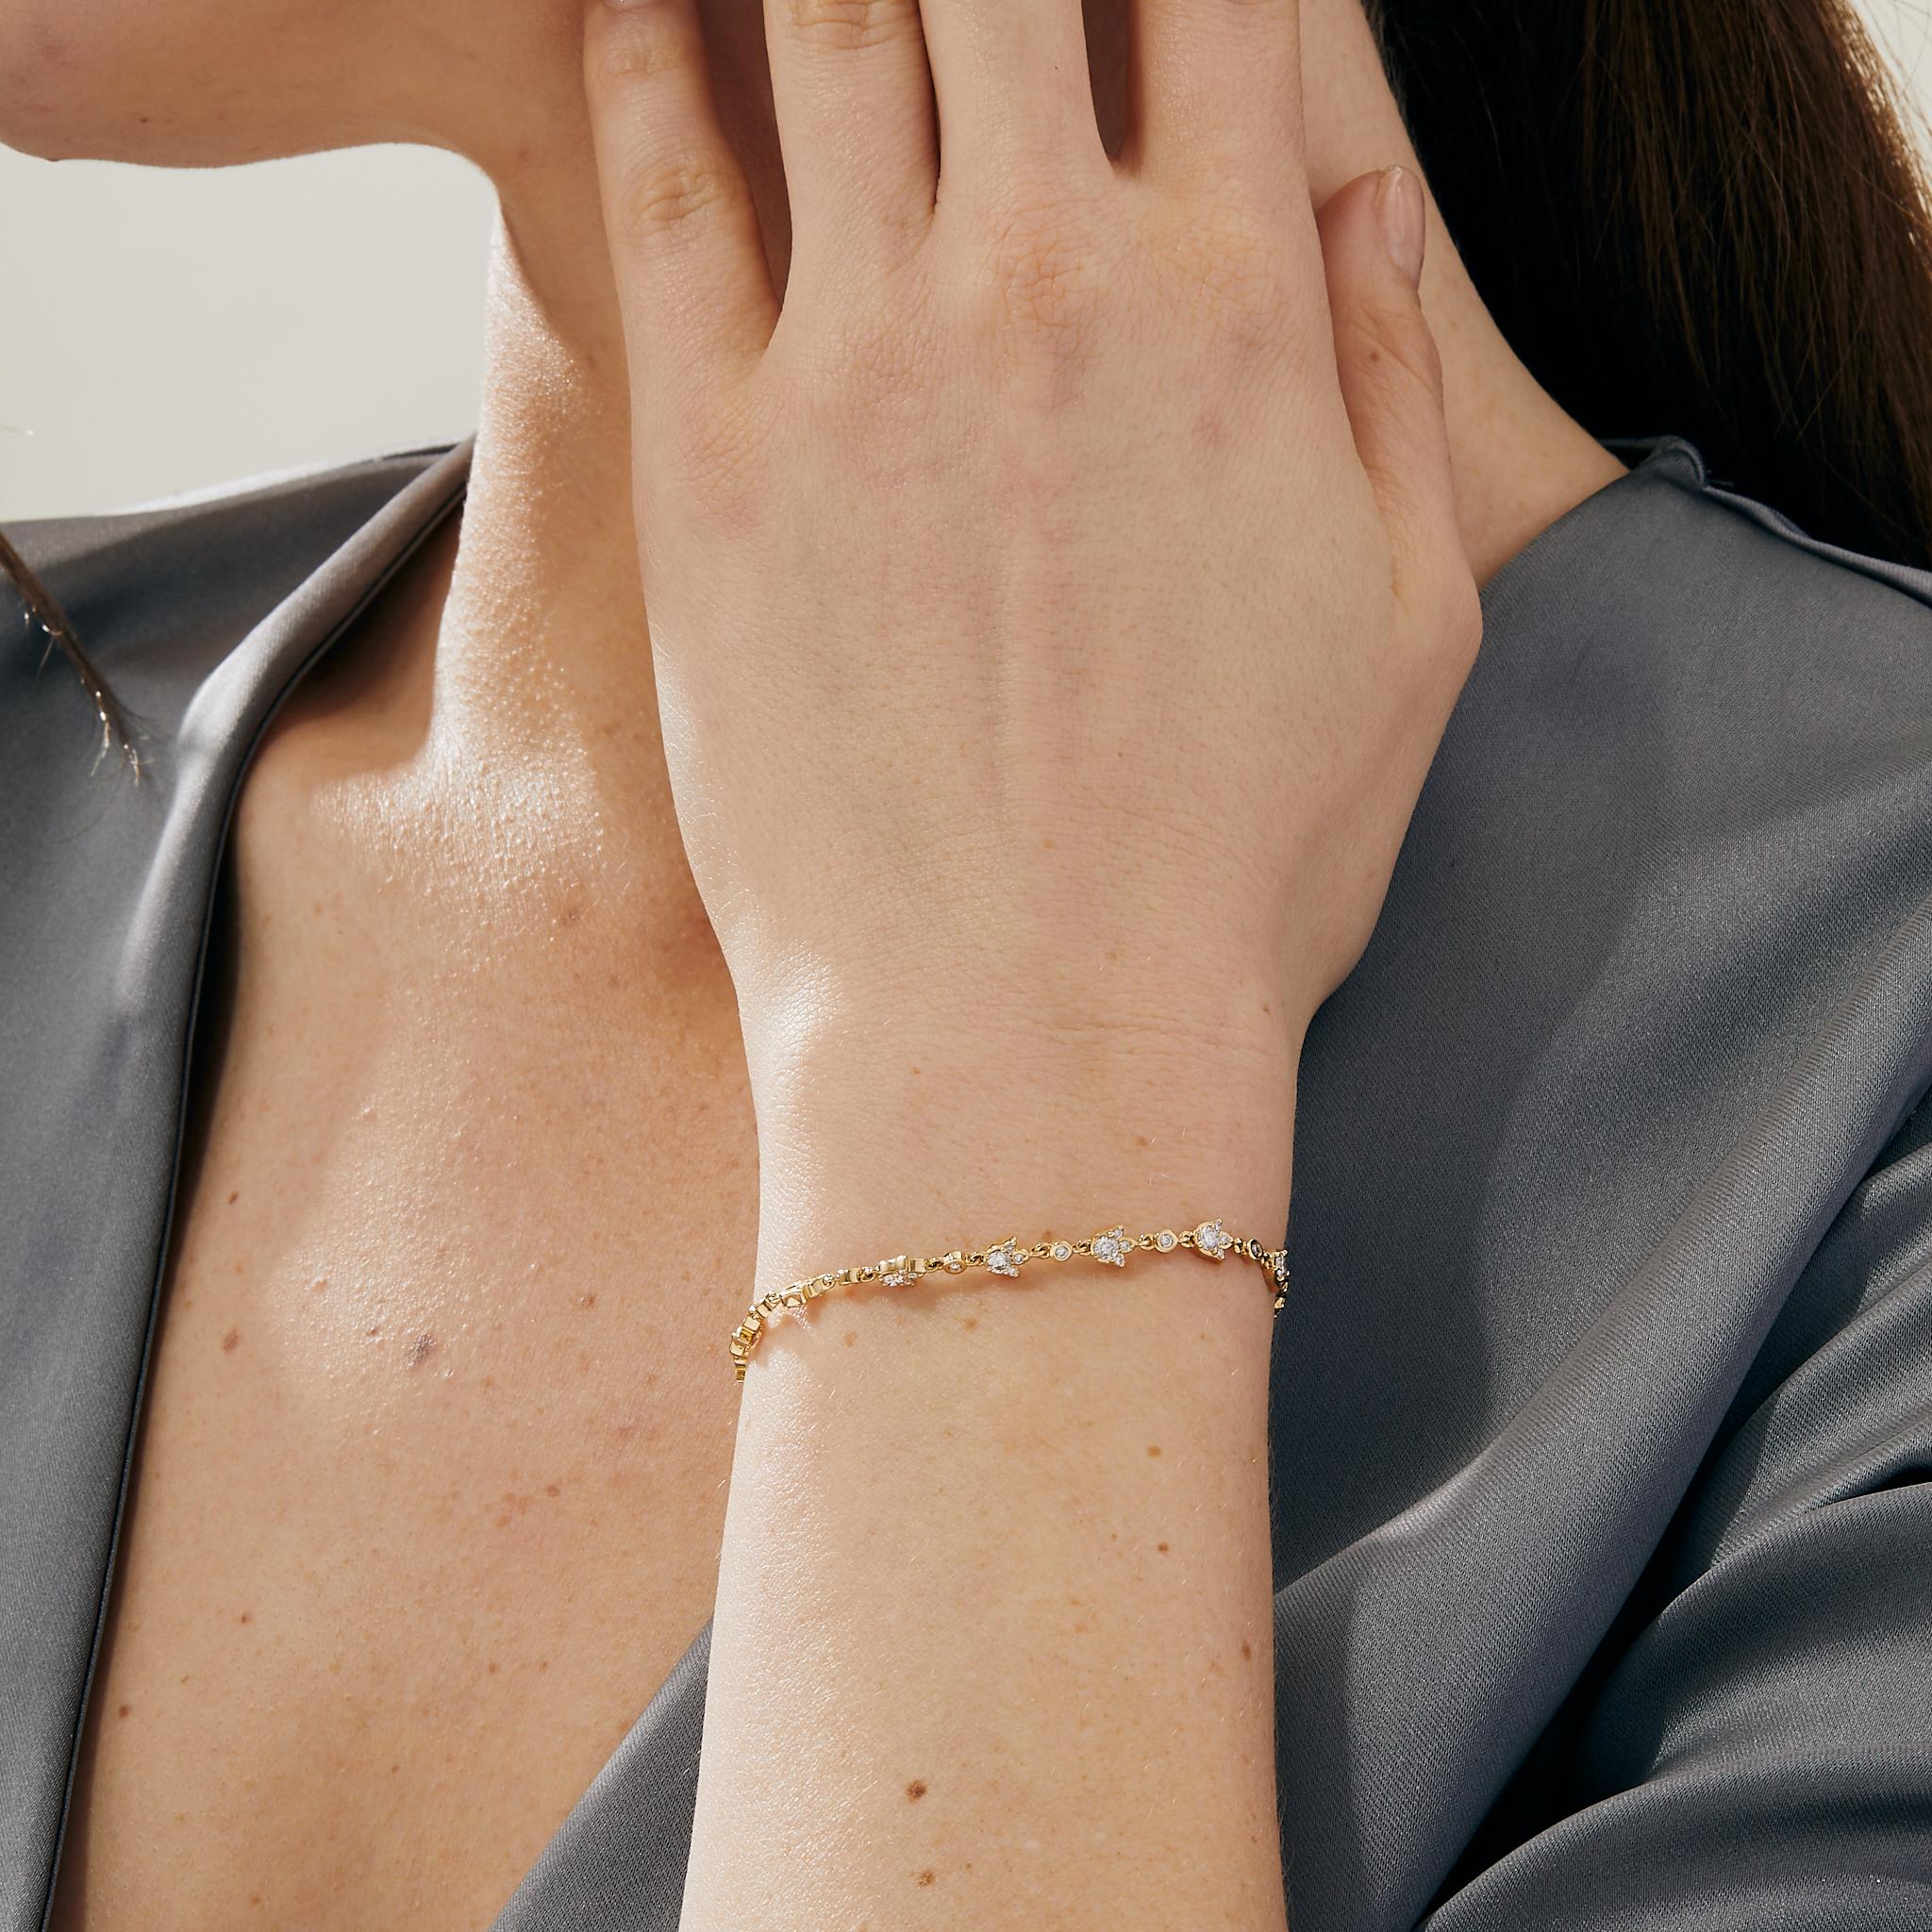 Created in 18 karat yellow gold
Diamonds 1.50 carats approx.
8 inch length with lobster clasp
Bracelet can be clasped at any length
Also available in various lengths

Effortlessly crafted from 18-karat yellow gold, this sophisticated bracelet